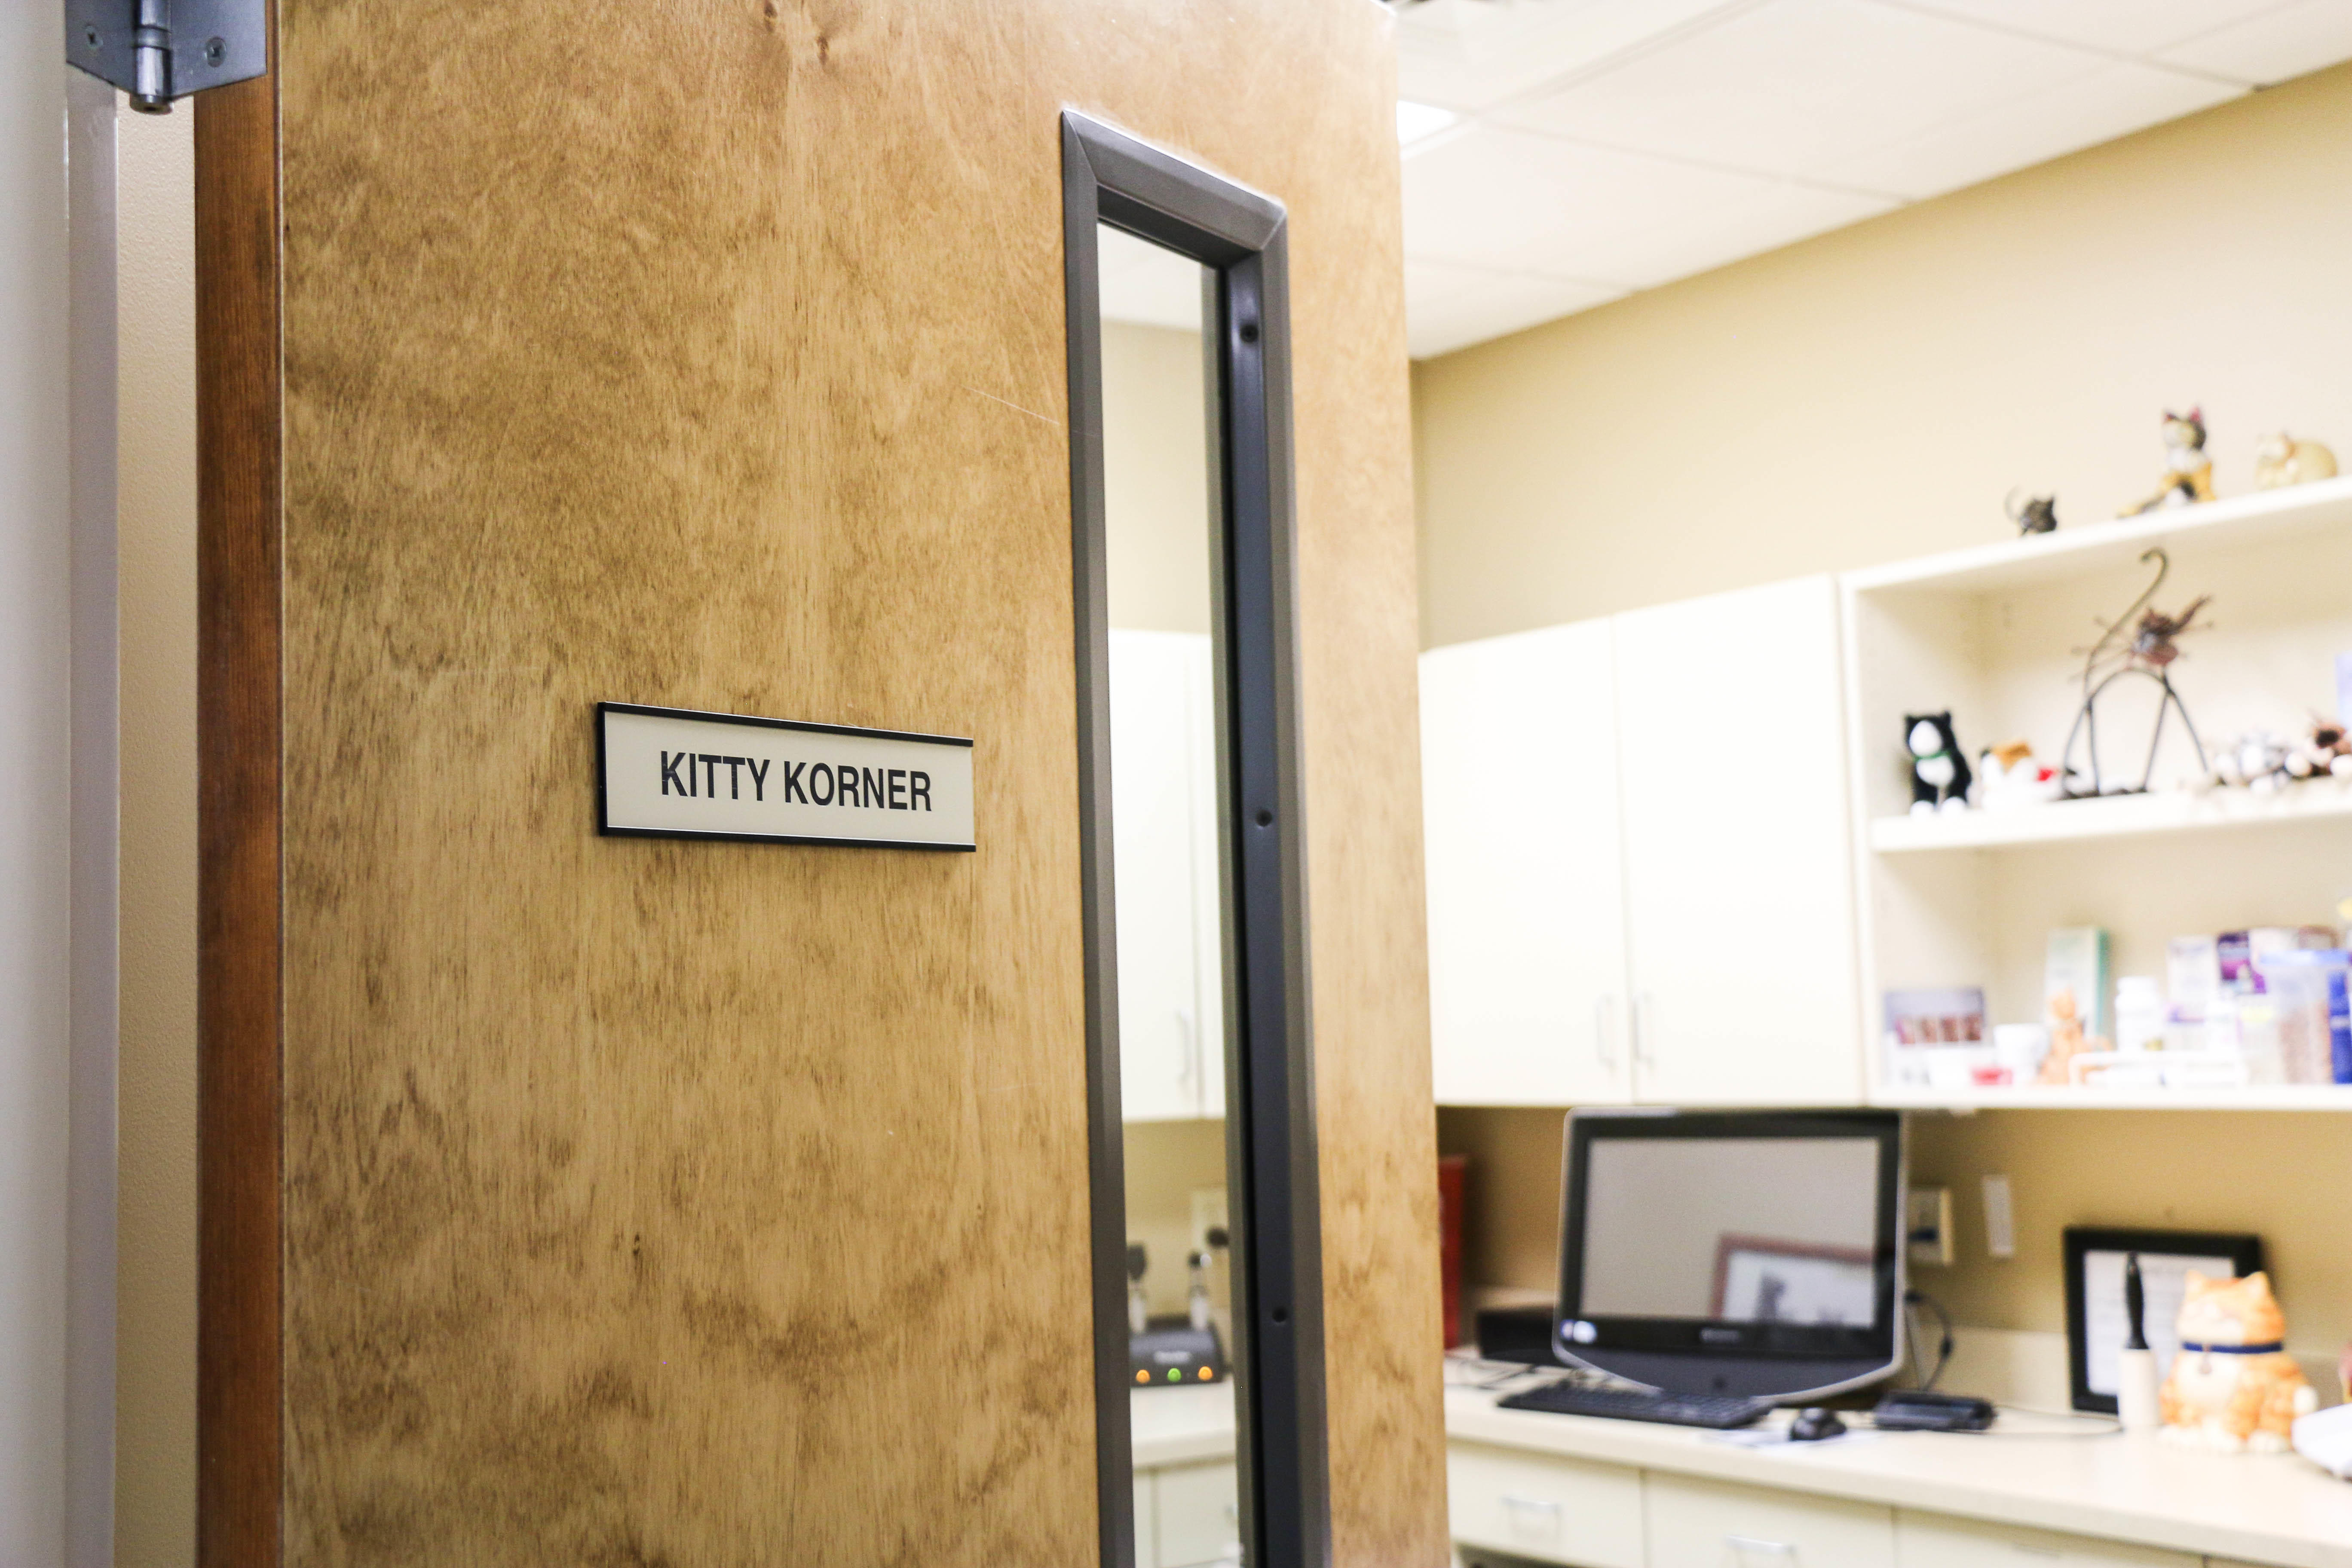 Welcome to our "Kitty Corner," our exam room set-up specifically for our fabulous feline patients!